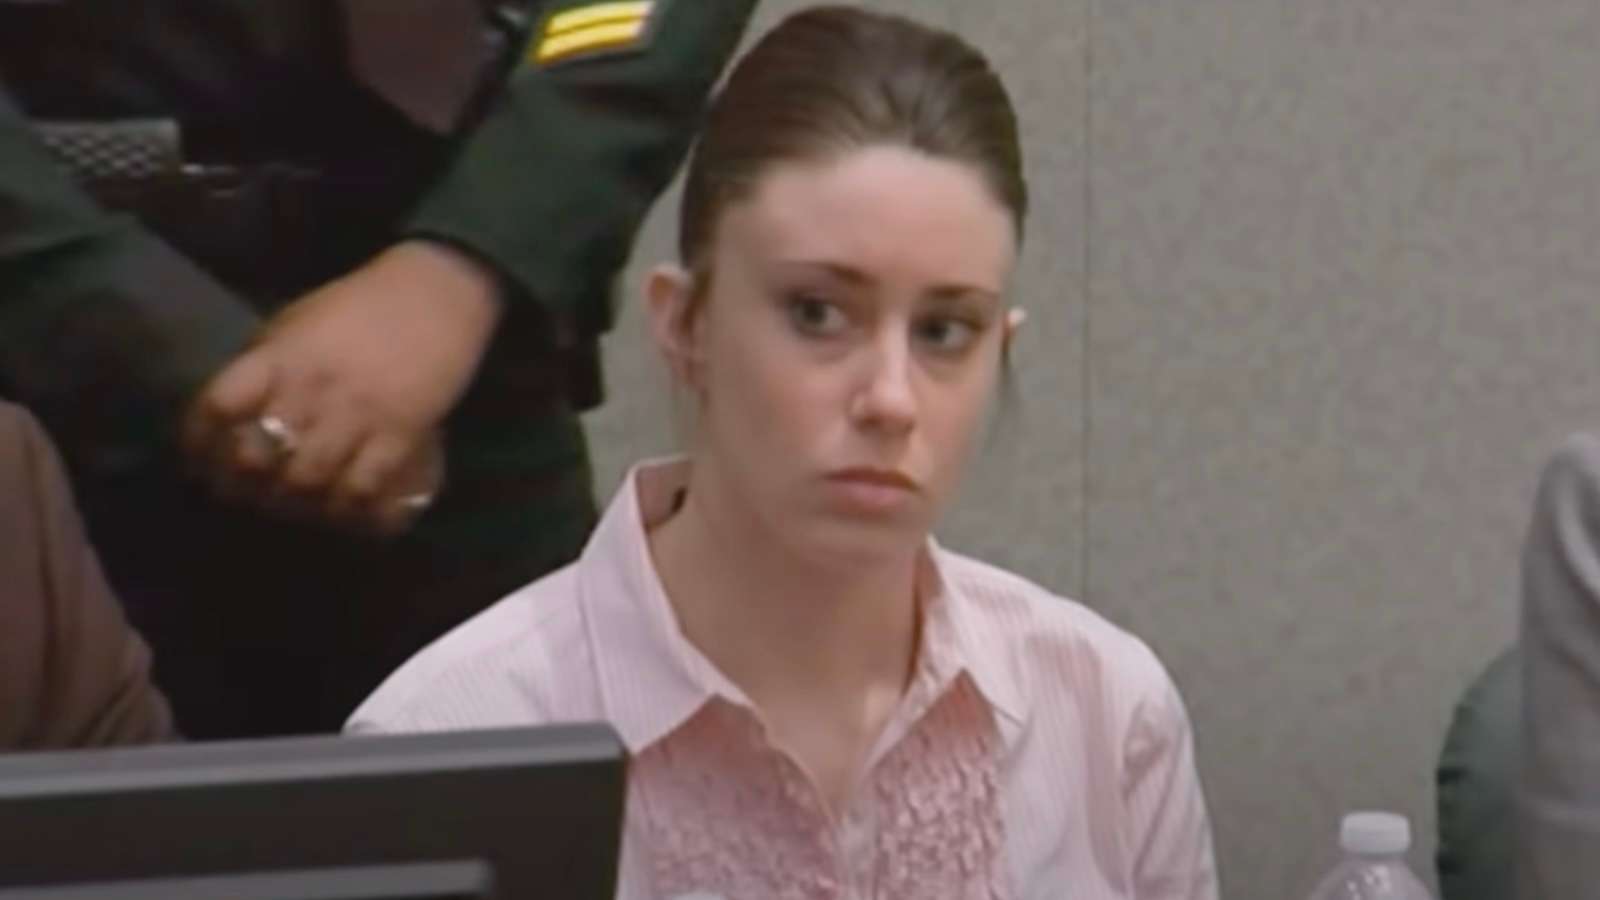 Casey Anthony in the 2011 murder trial